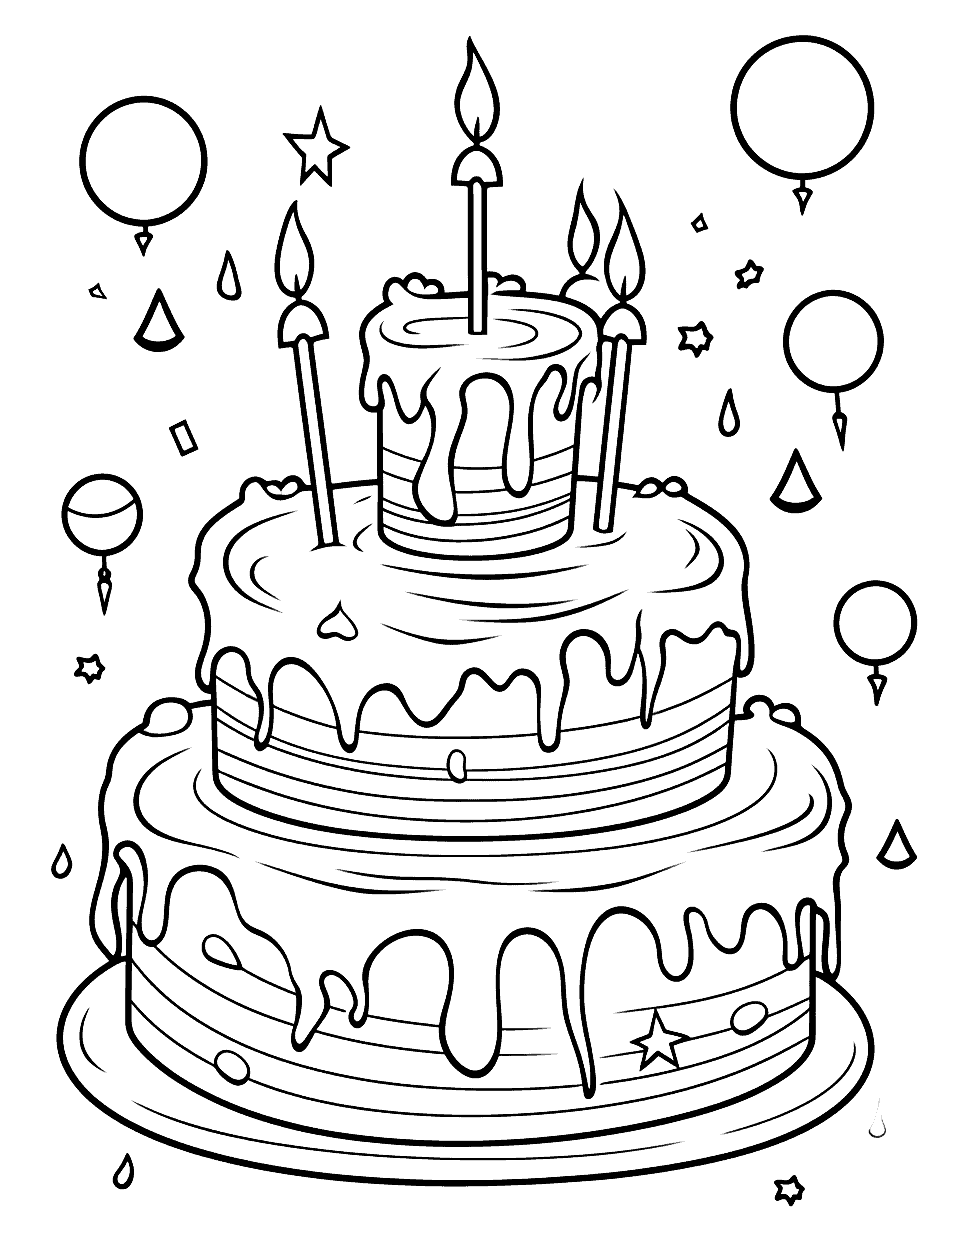 The Ultimate Birthday Cake Happy Coloring Page - A giant, intricately decorated birthday cake, topped with an array of colorful candles ready for coloring.